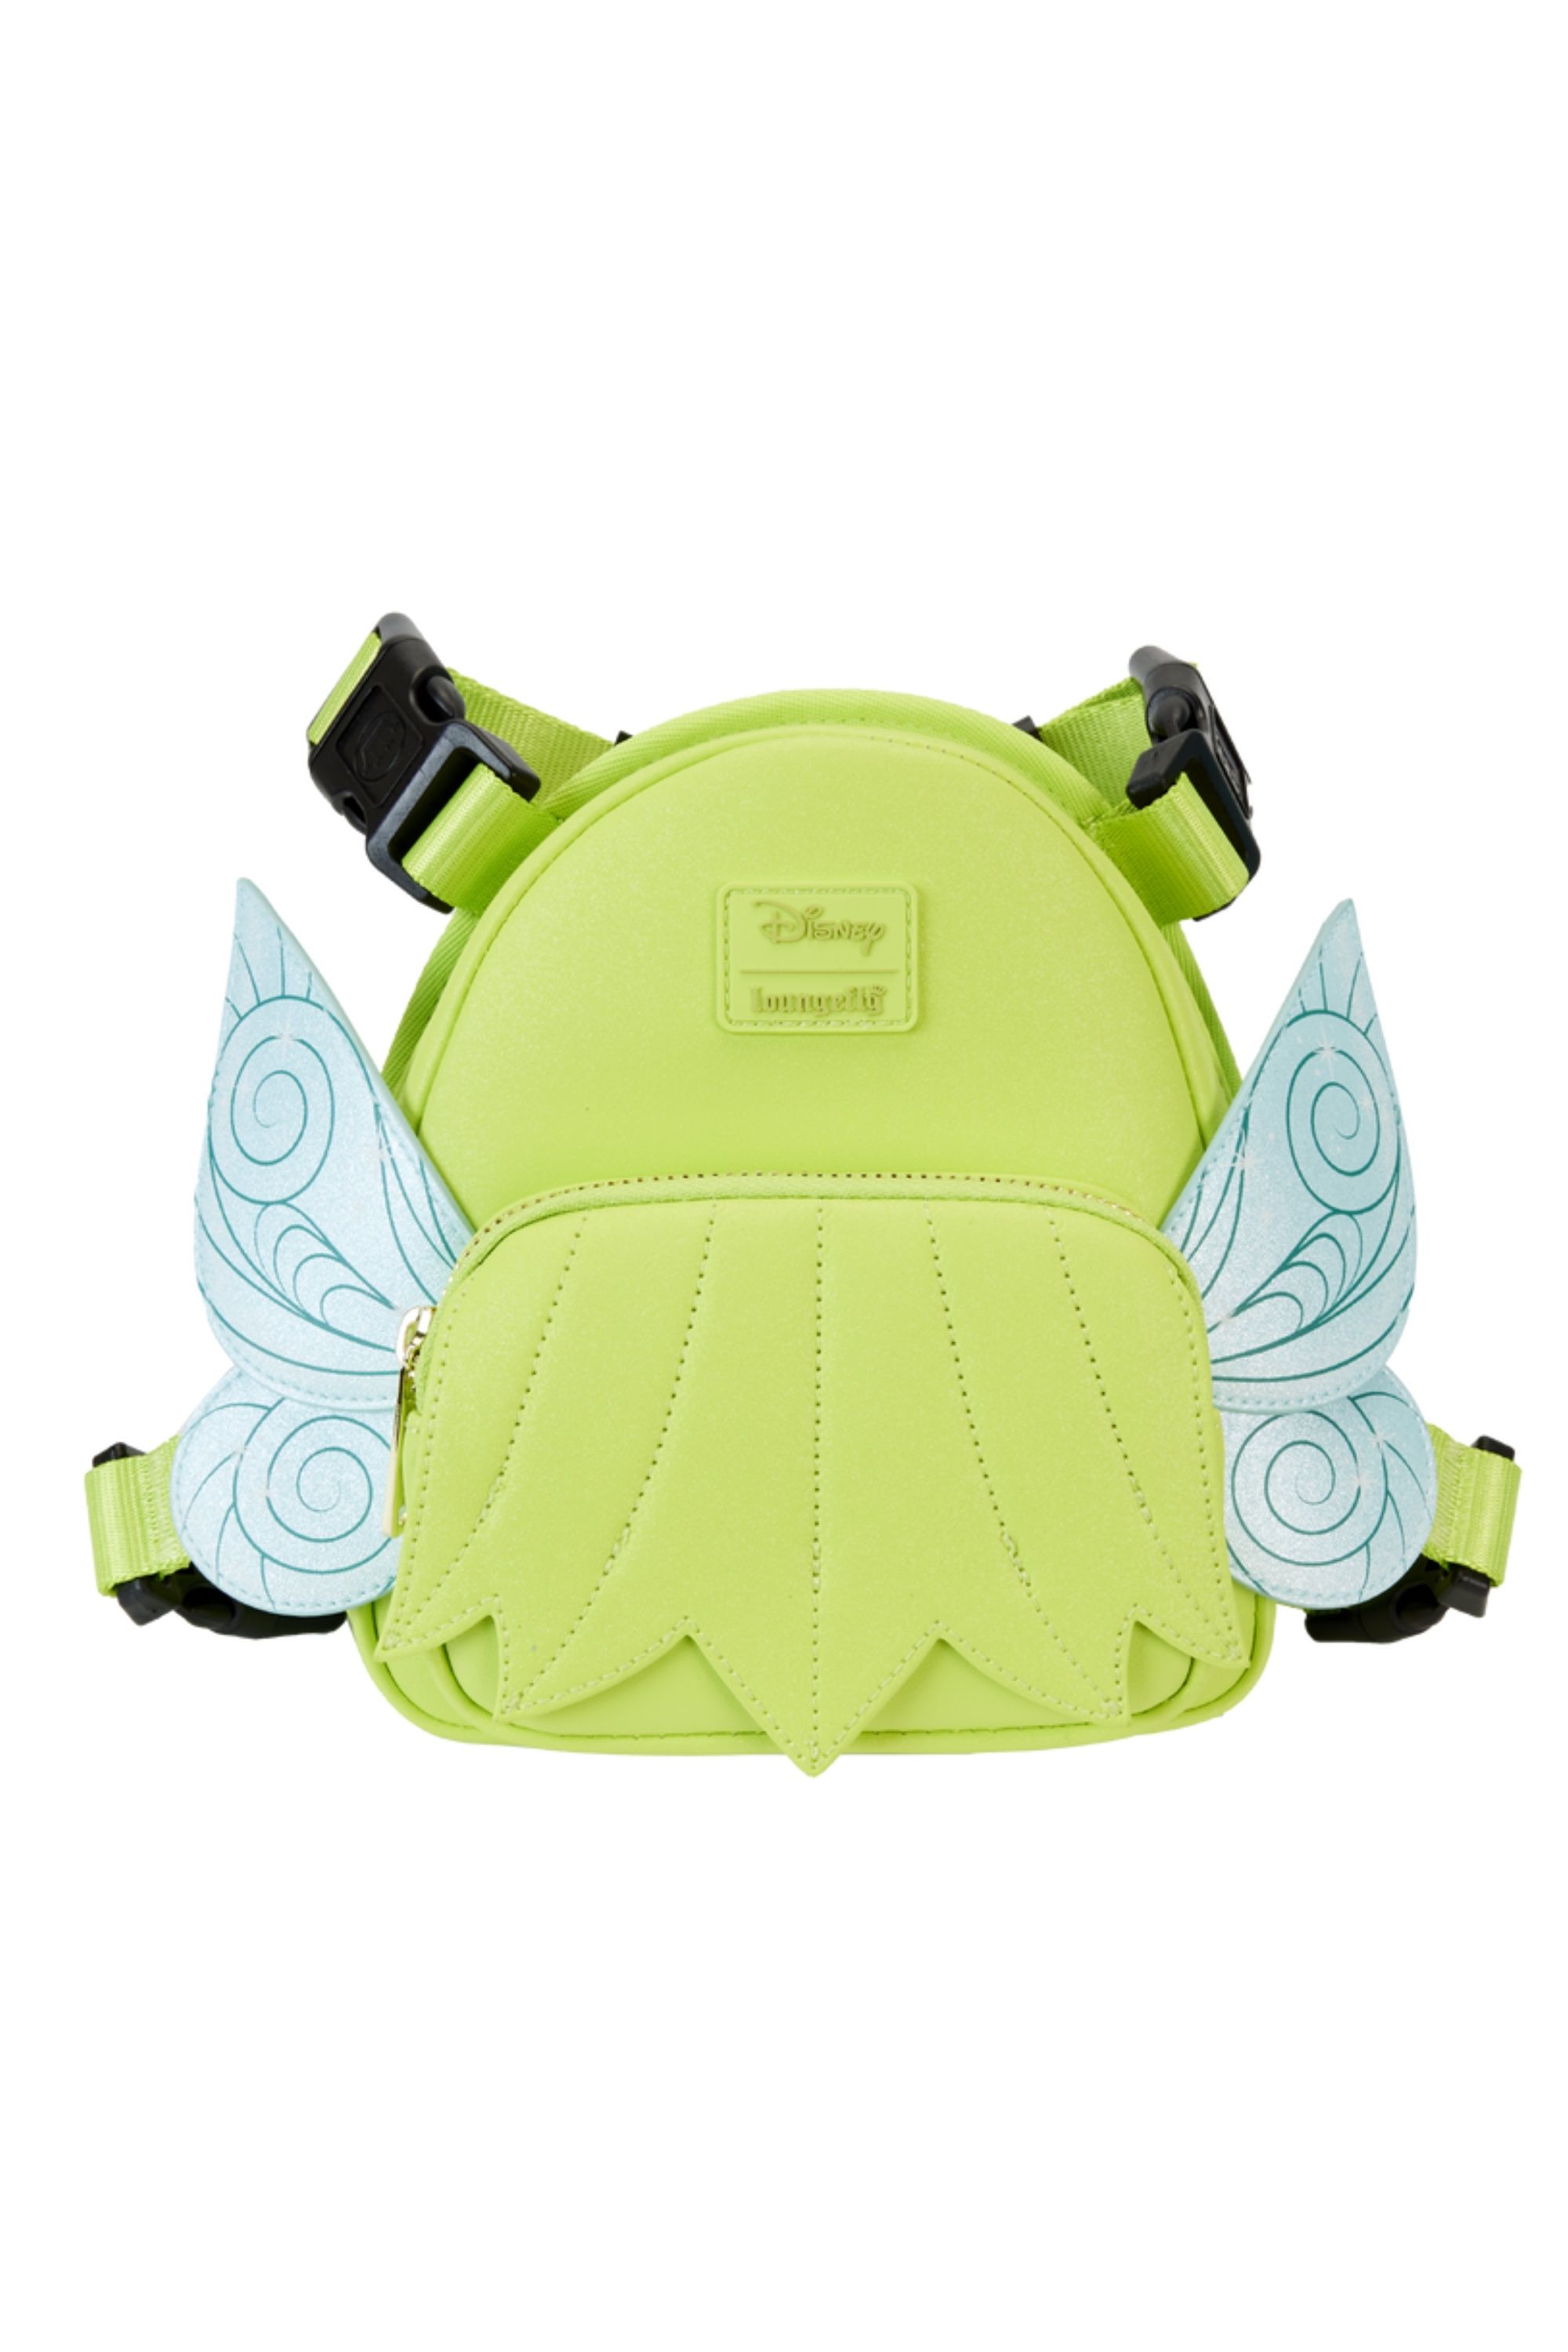 The Loungefly Tinkerbell Pet Harness on a white background.